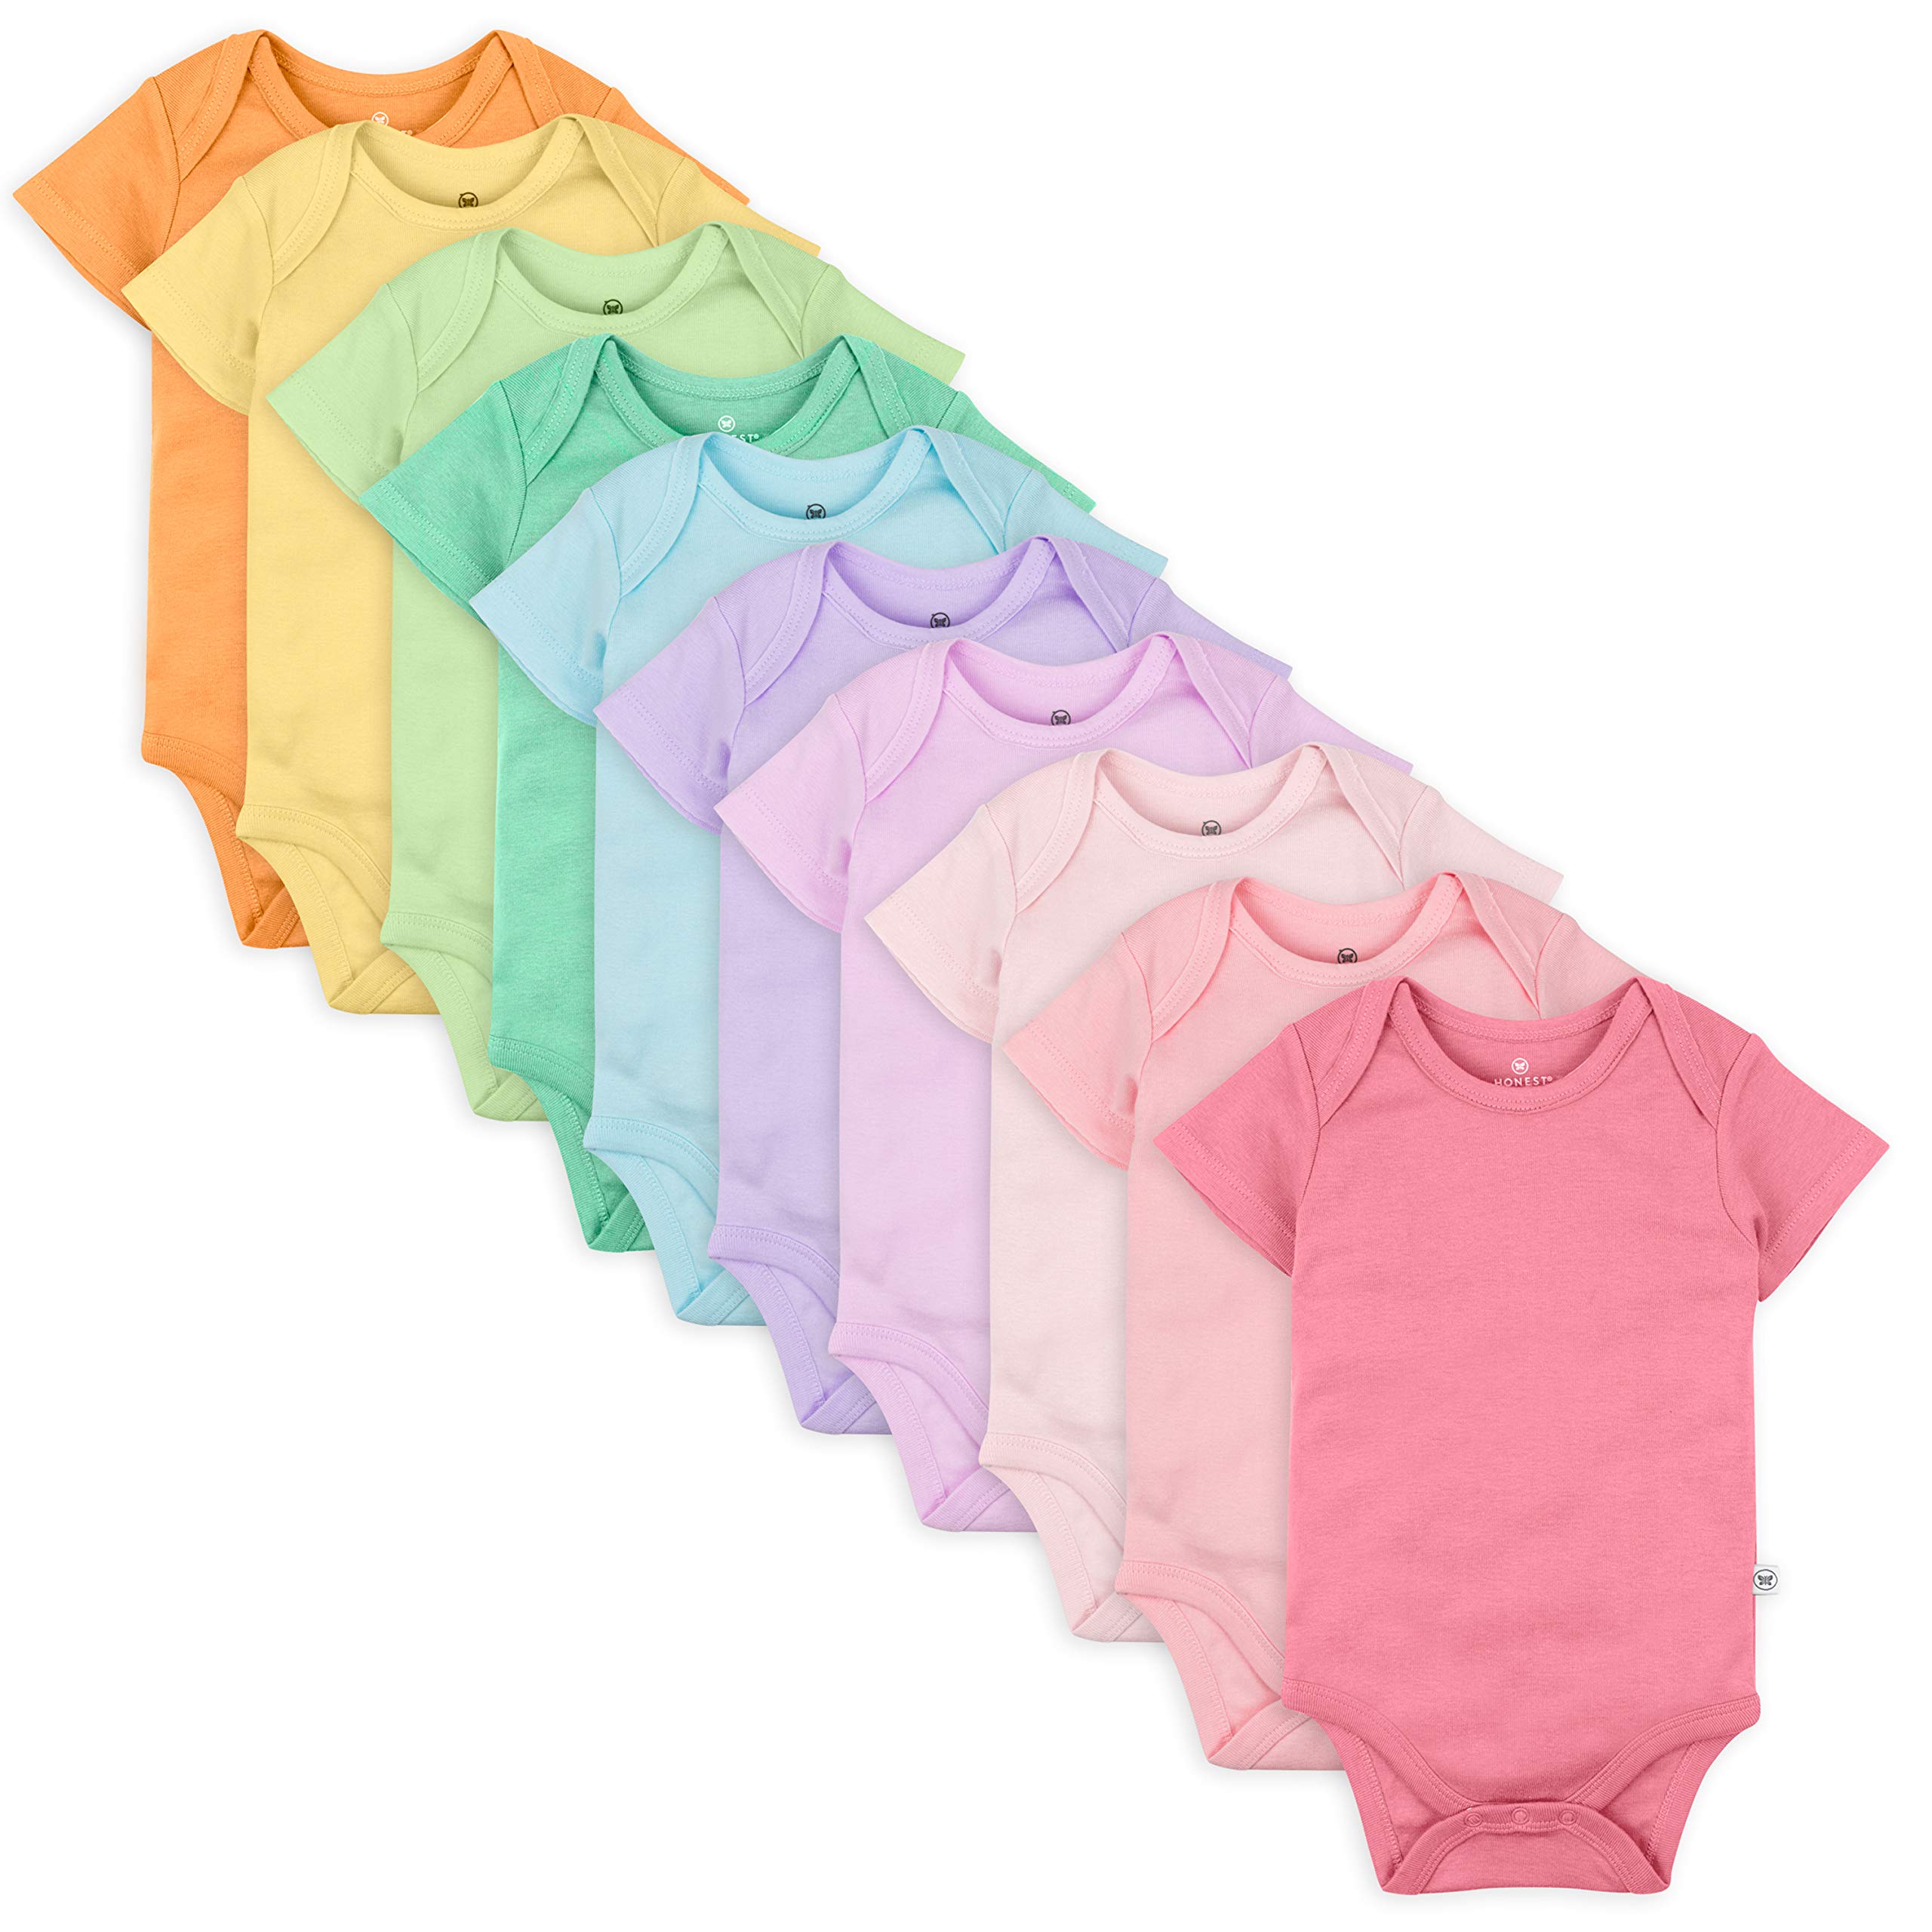 HonestBaby 10-Pack Short Sleeve Bodysuits One-Piece for Infant Boys, Girls, Unisex Baby 100% Organic Cotton